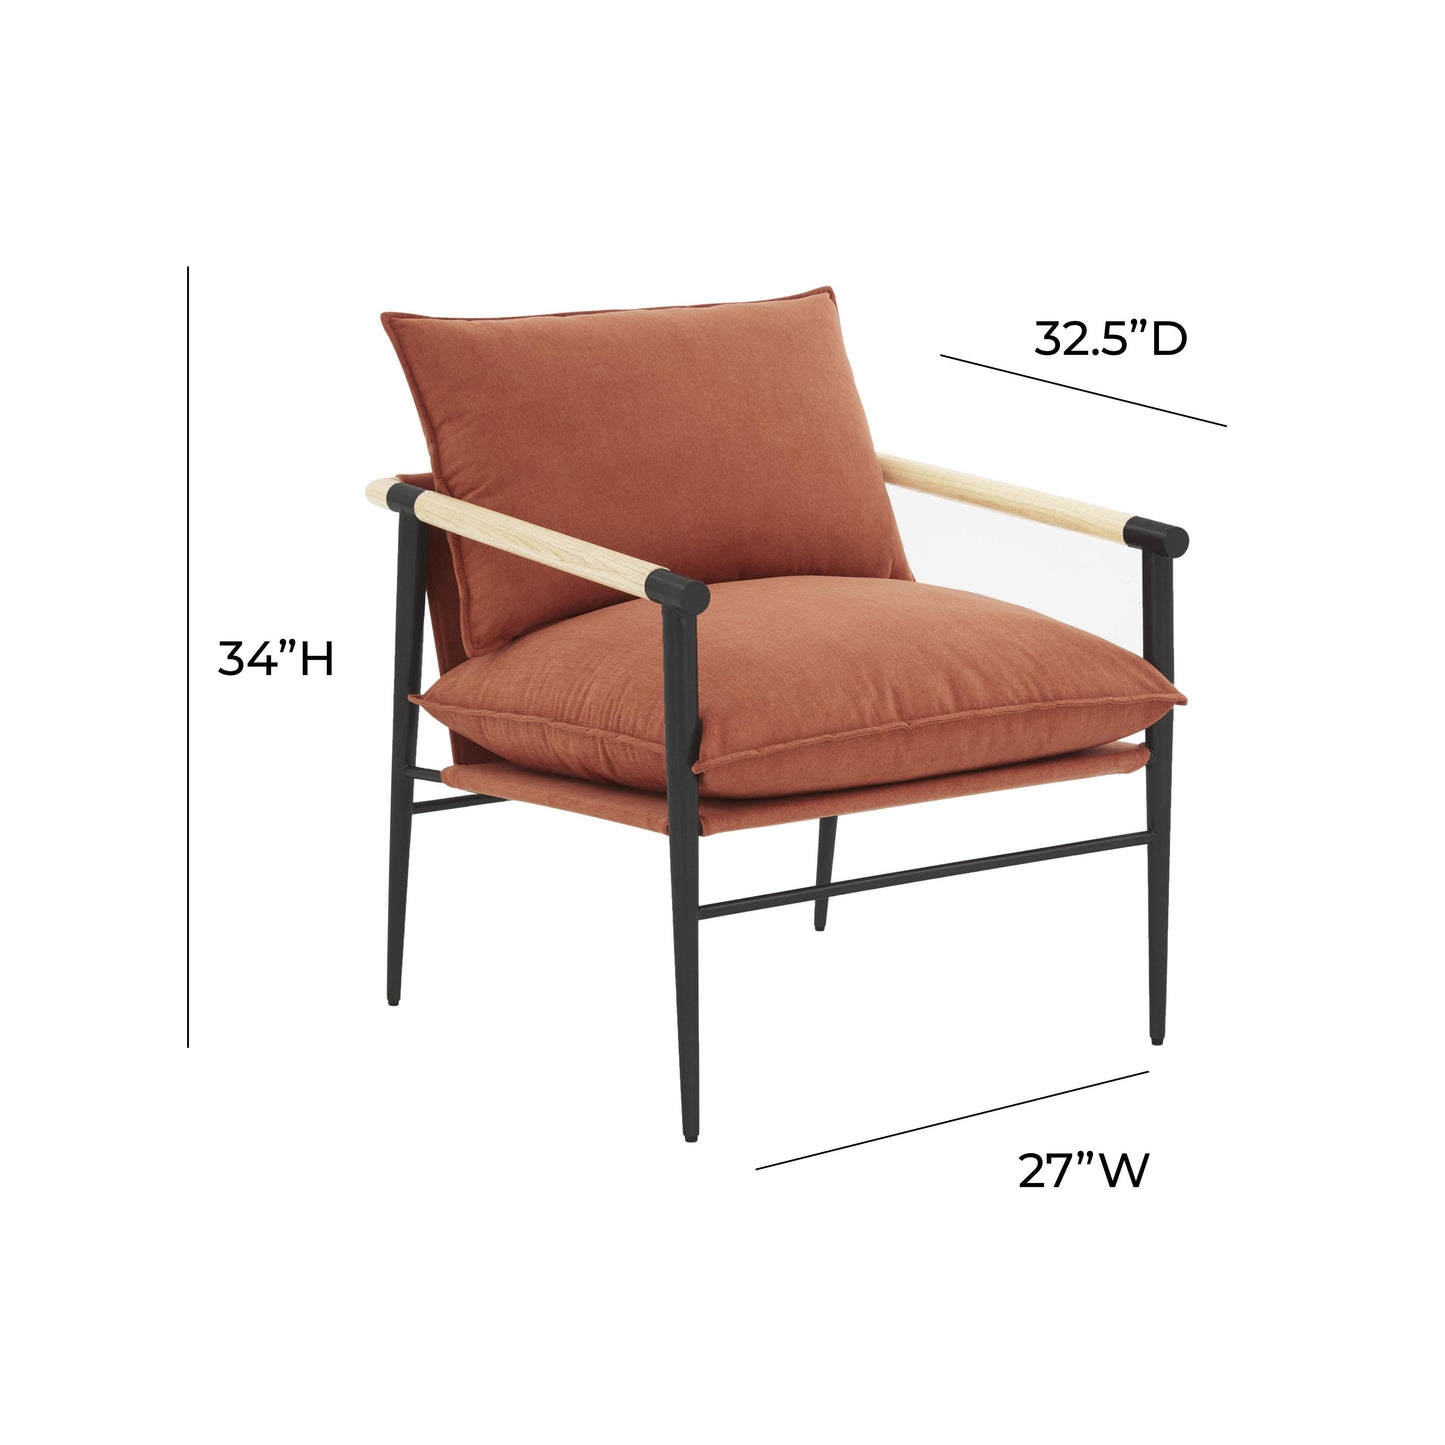 Cali Rust Accent Chair by TOV